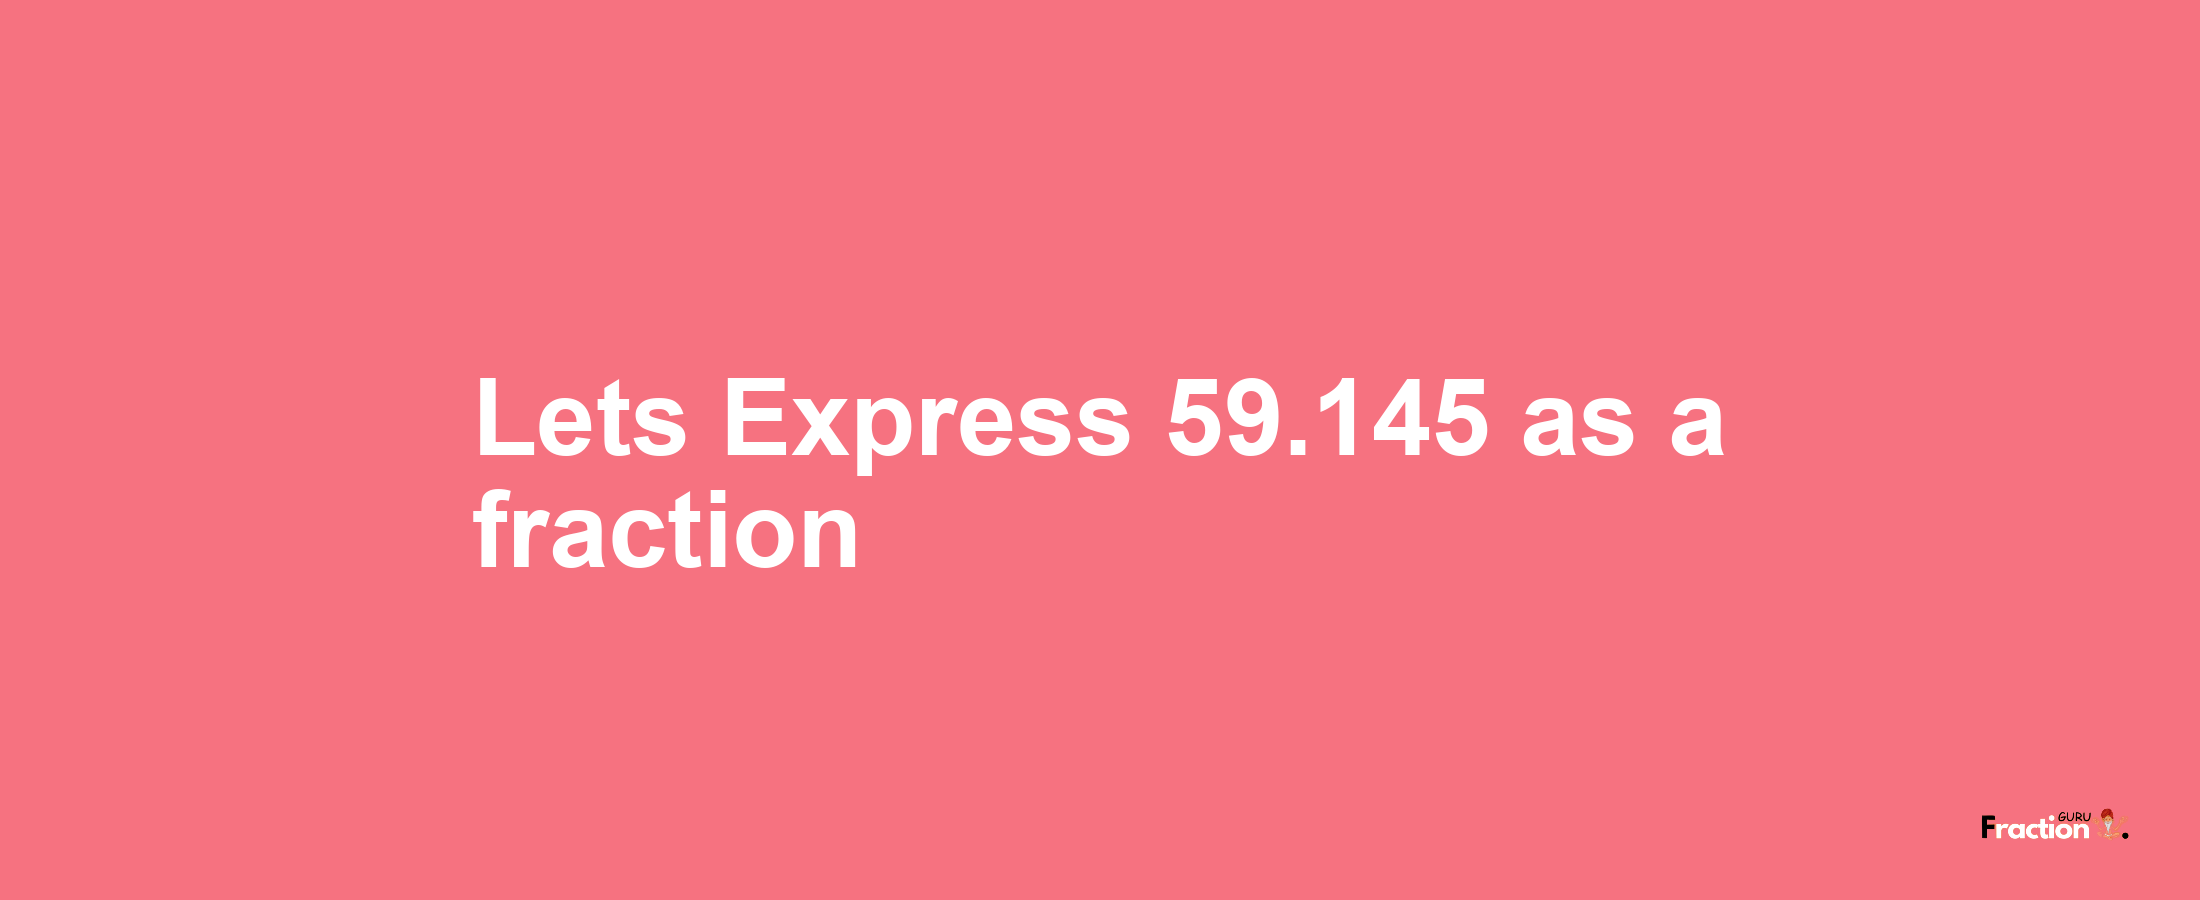 Lets Express 59.145 as afraction